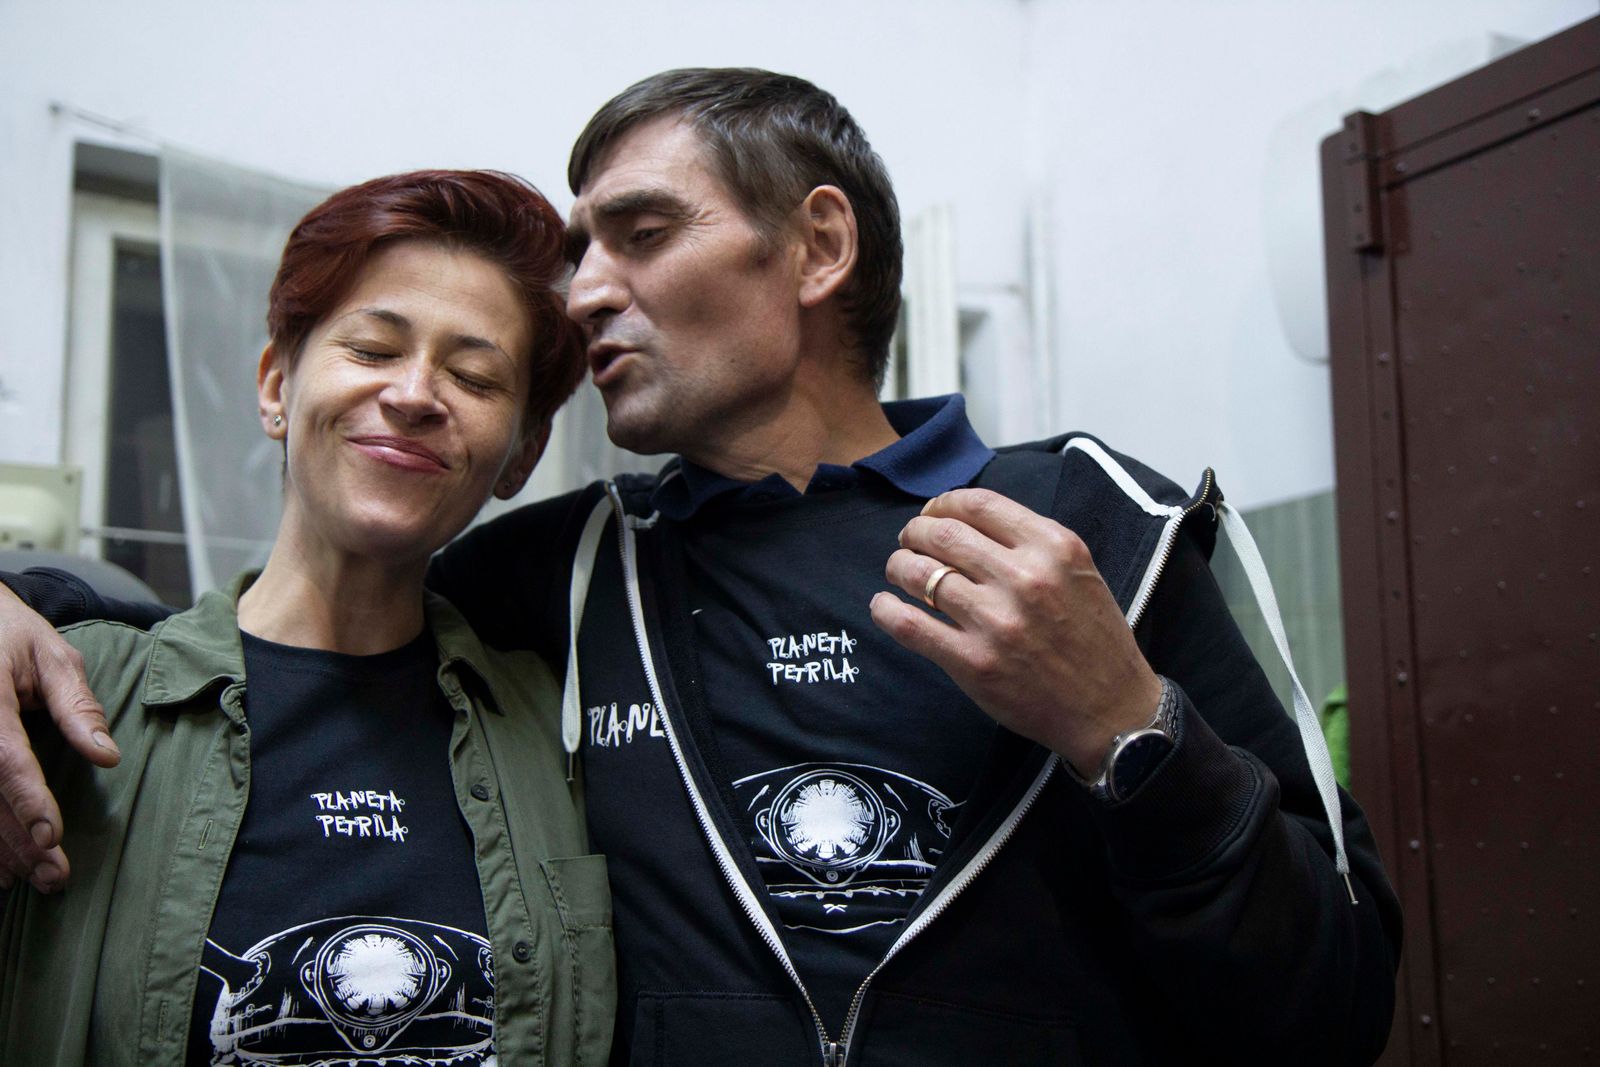 © Clara Kleininger - Ina and Cenușă, who worked for 27 years as a miner and rescuer at the Petrila mine